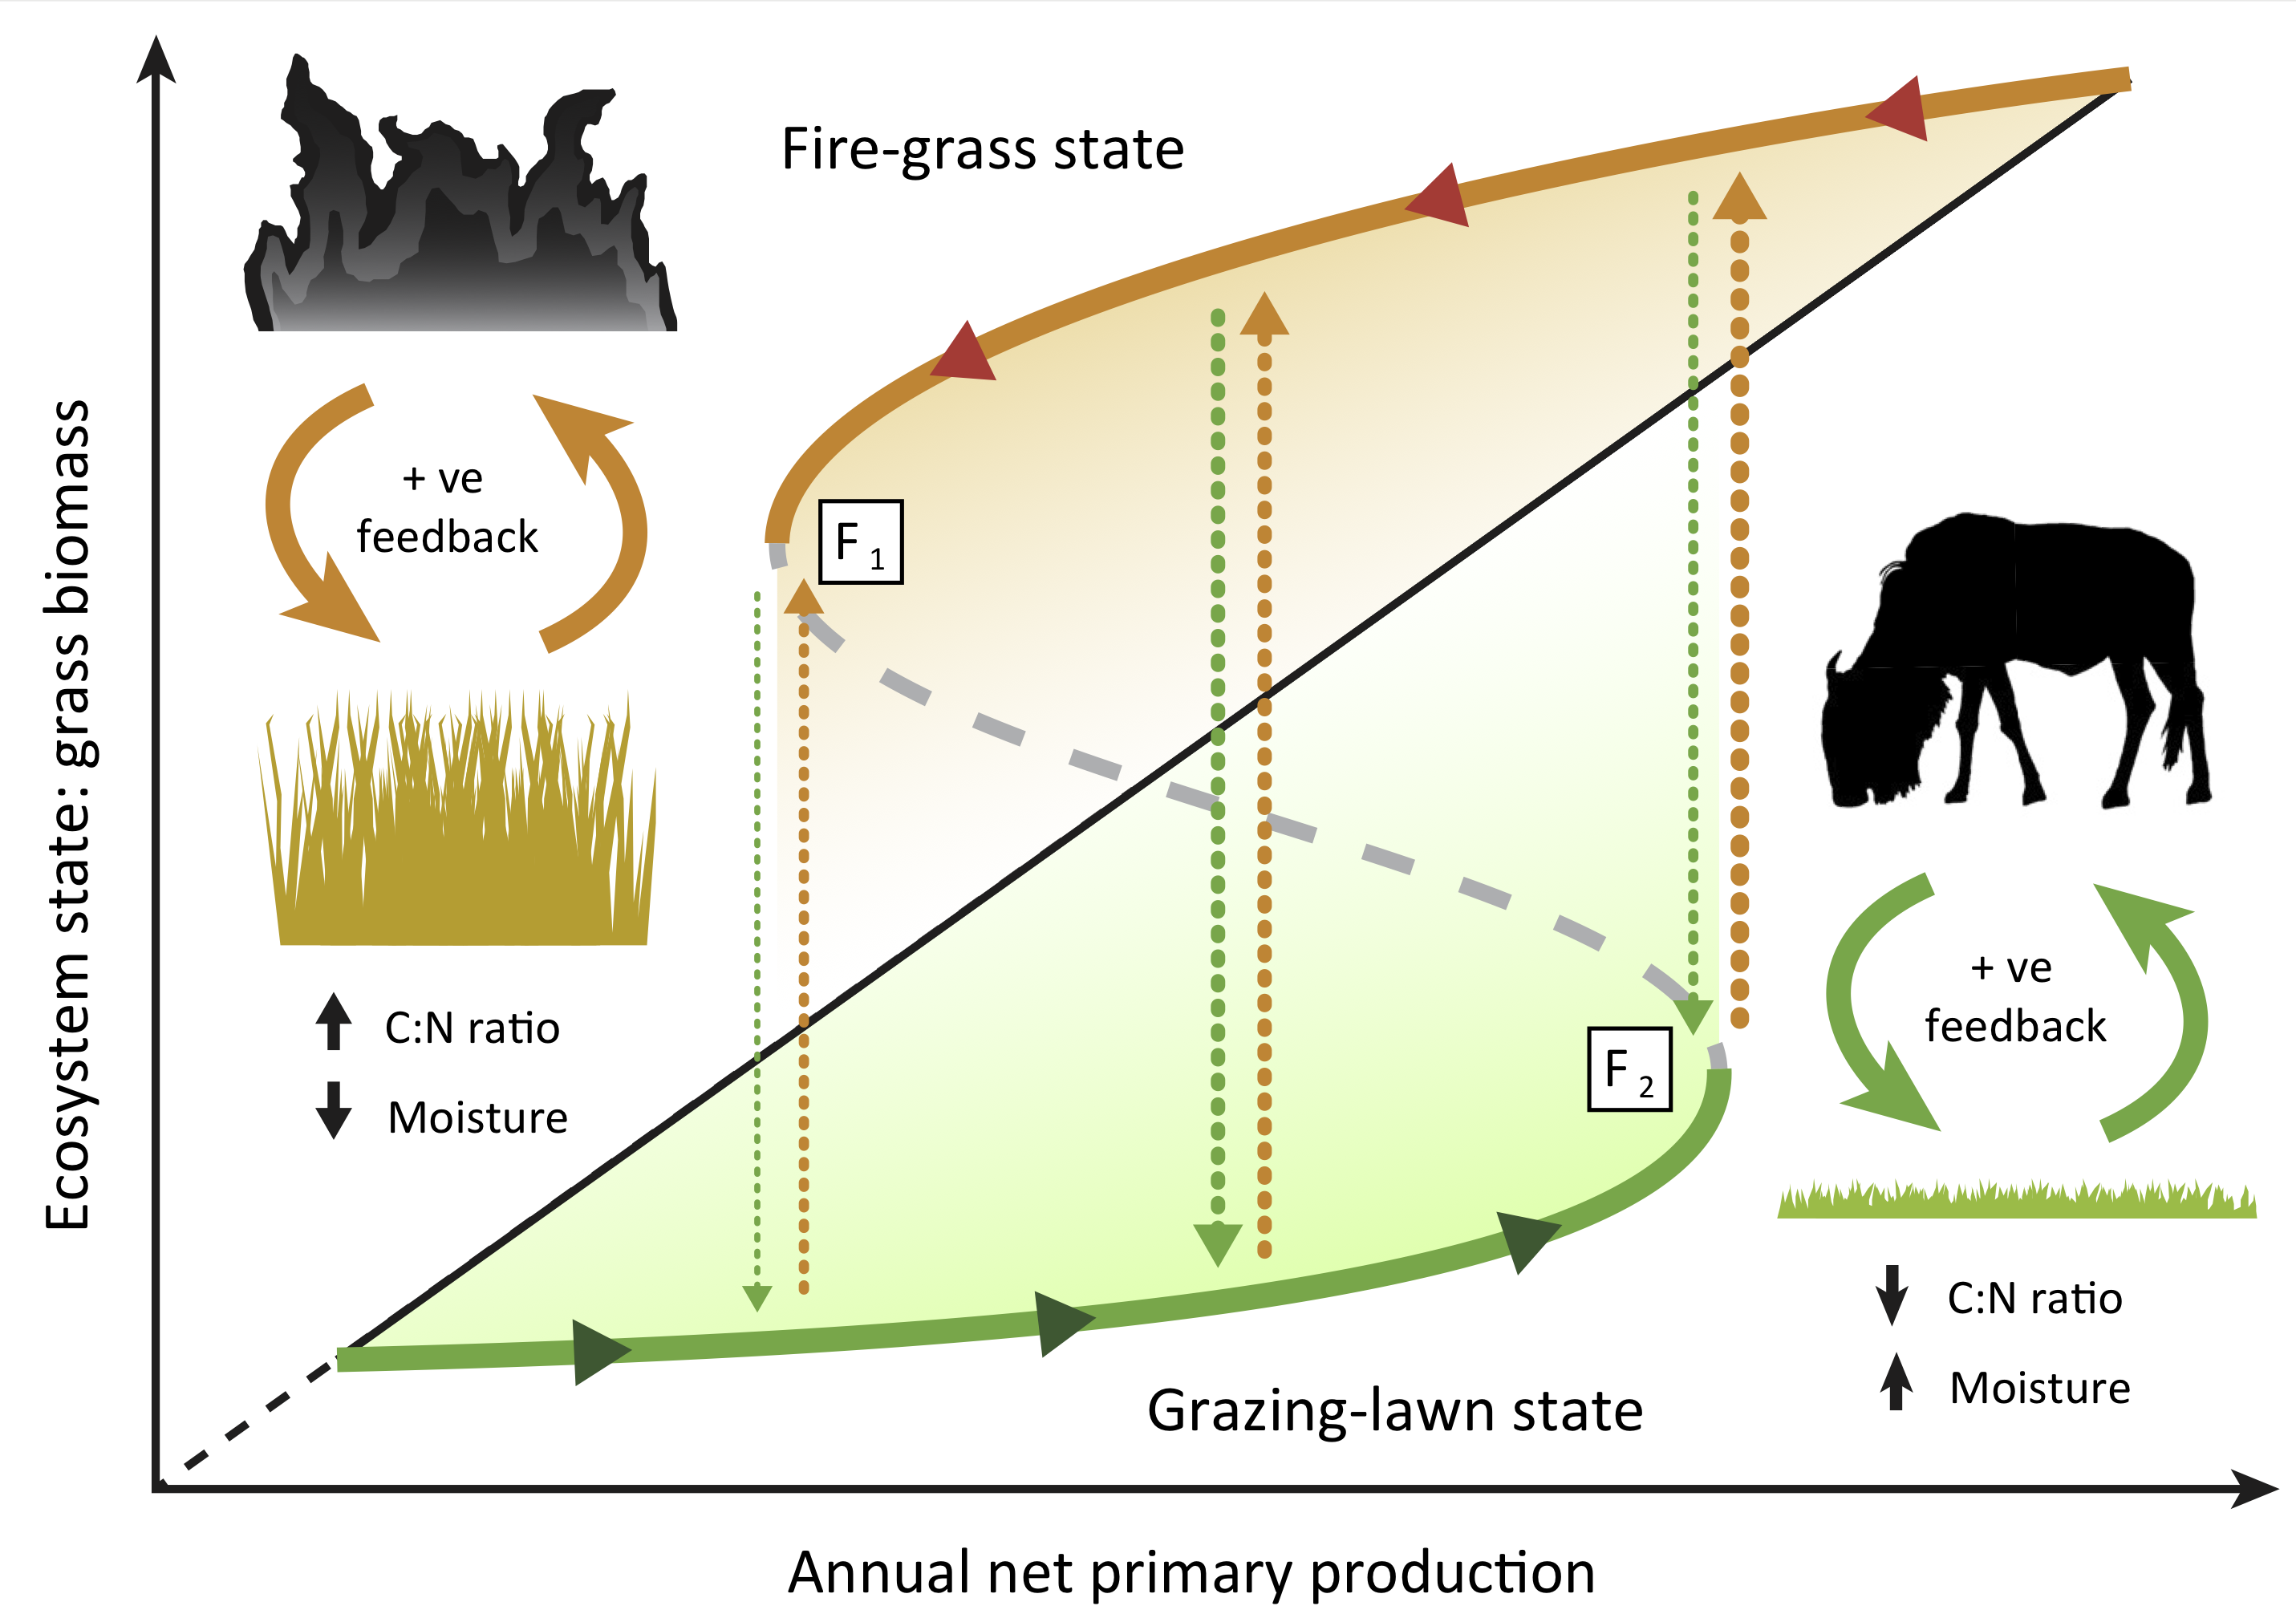 Figure I in Box I from Hempson et al. (2019) illustrating catastrophic shifts between alternate stable states in grassland communities. Conceptual diagram of alternate fire-grass (orange unbroken line) and grazing-lawn (green unbroken line) stable states along a productivity gradient. Each state is stabilized by positive feedbacks (filled orange and green arrows) with fire and grazers, respectively, a dynamic underpinned by opposing C:N ratios and leaf moisture traits amongst others. Transitions between states (broken lines) occur when shifts in rainfall exceed critical bifurcation points at \(F_1\) or \(F_2\), or when external factors precipitate changes. Shading represents grasses with higher palatability (green) or flammability (orange), respectively. The black diagonal line represents the general linear increase in grass biomass with annual net primary production.